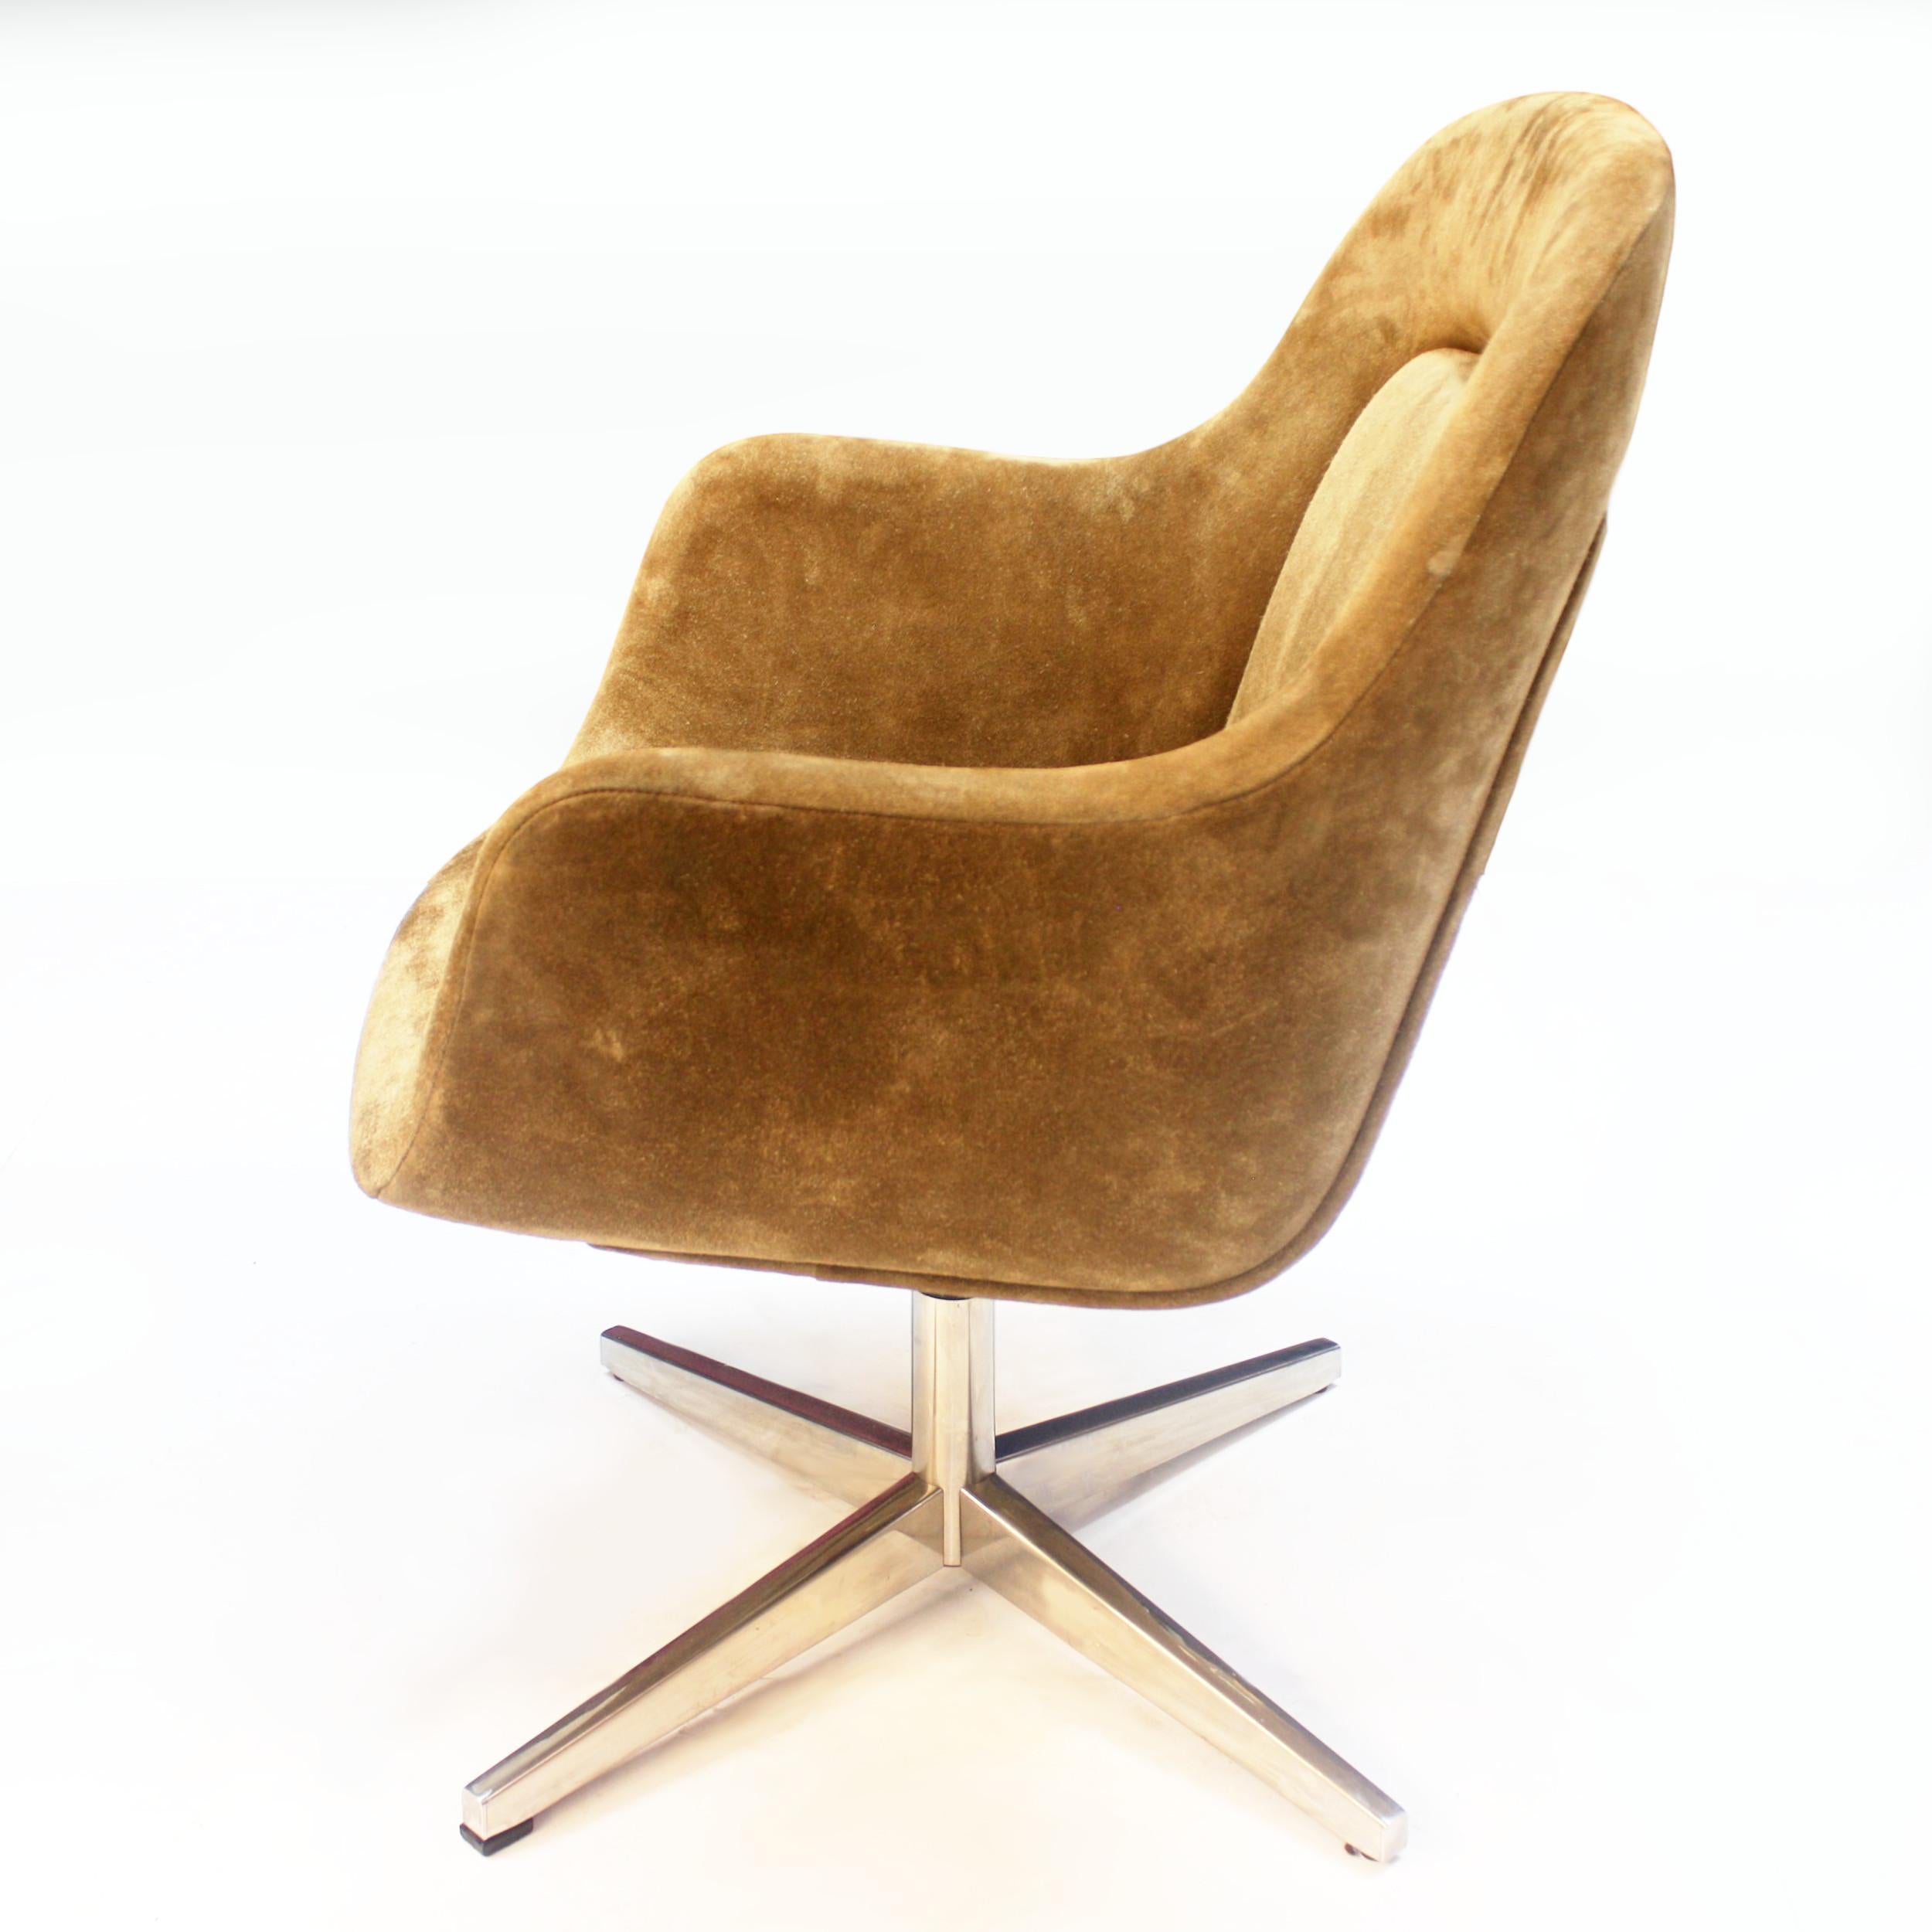 Late 20th Century Mid-Century Modern Suede Side / Guest / Desk Chairs by Max Pearson for Knoll